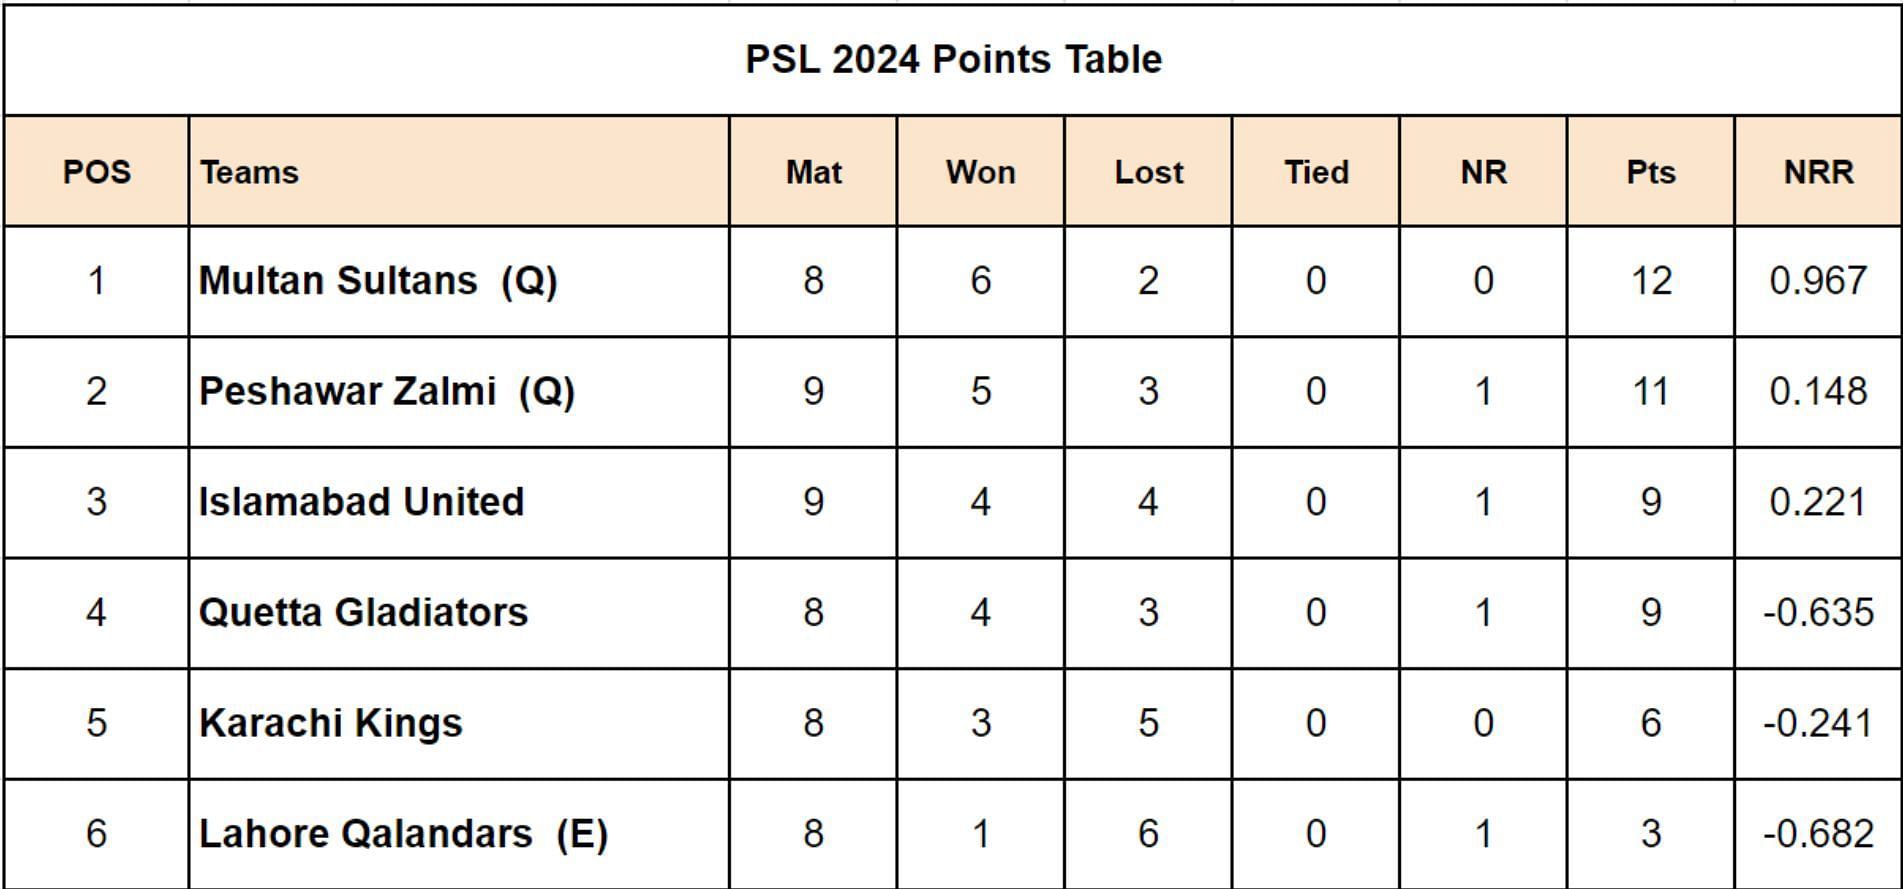 PSL 2024 Points Table Updated after Match 25